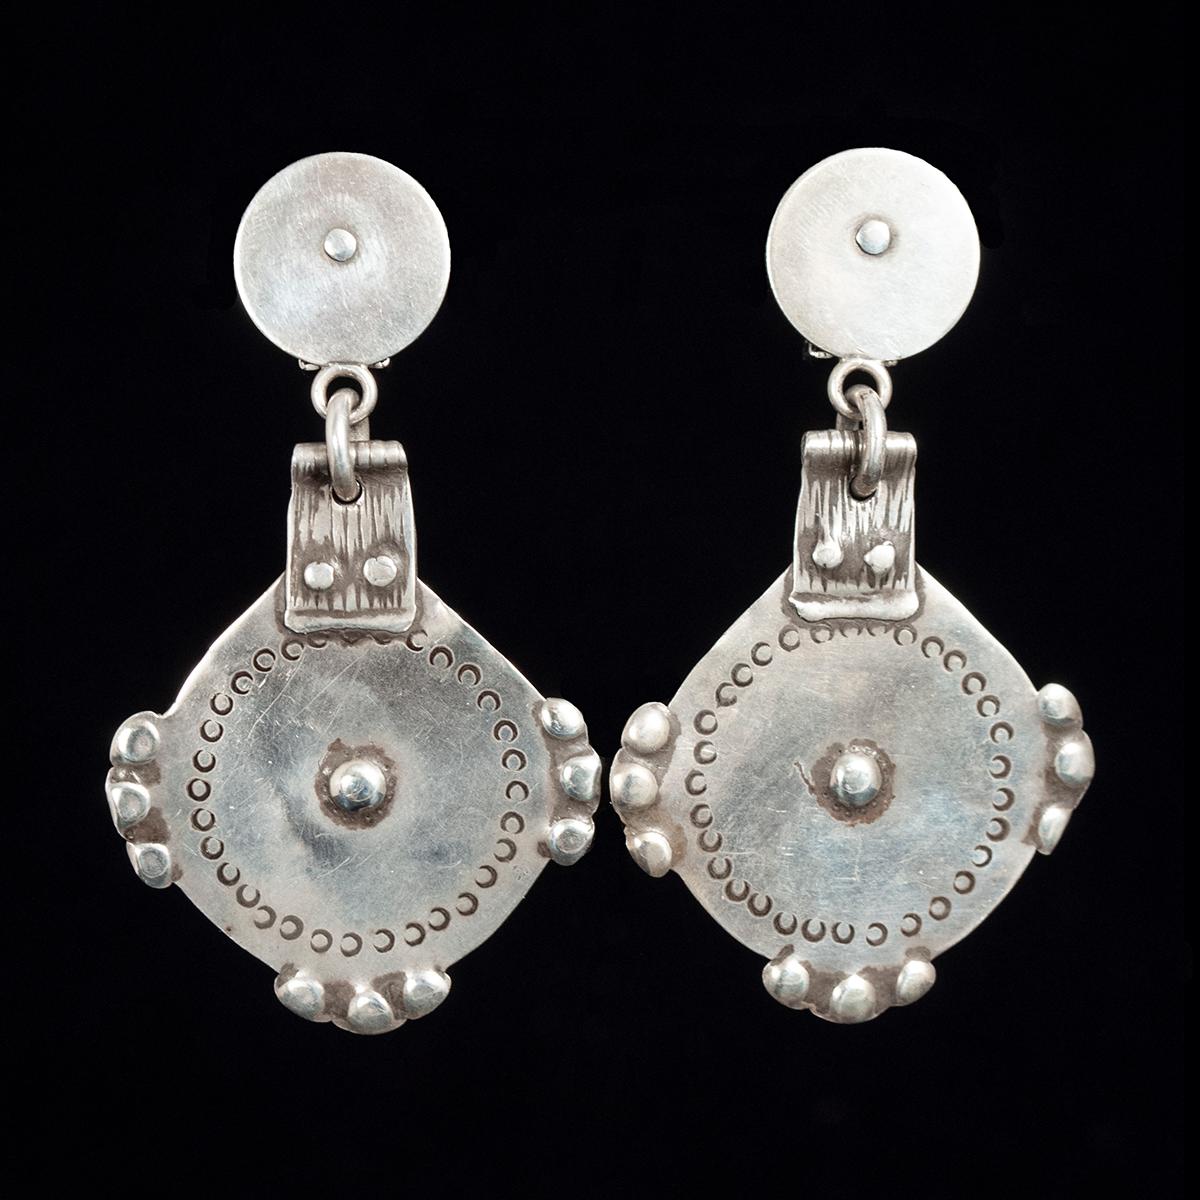 Mid-20th Century Moroccan Silver Charm earrings by Jewels of Santa Fe/Marrakesh

A pair of earrings made by Jewels with rare silver charms from the Ida ou Nadif people living in the Anti-Atlas Mountains of Morocco.
They are 3 inches long, 1.75